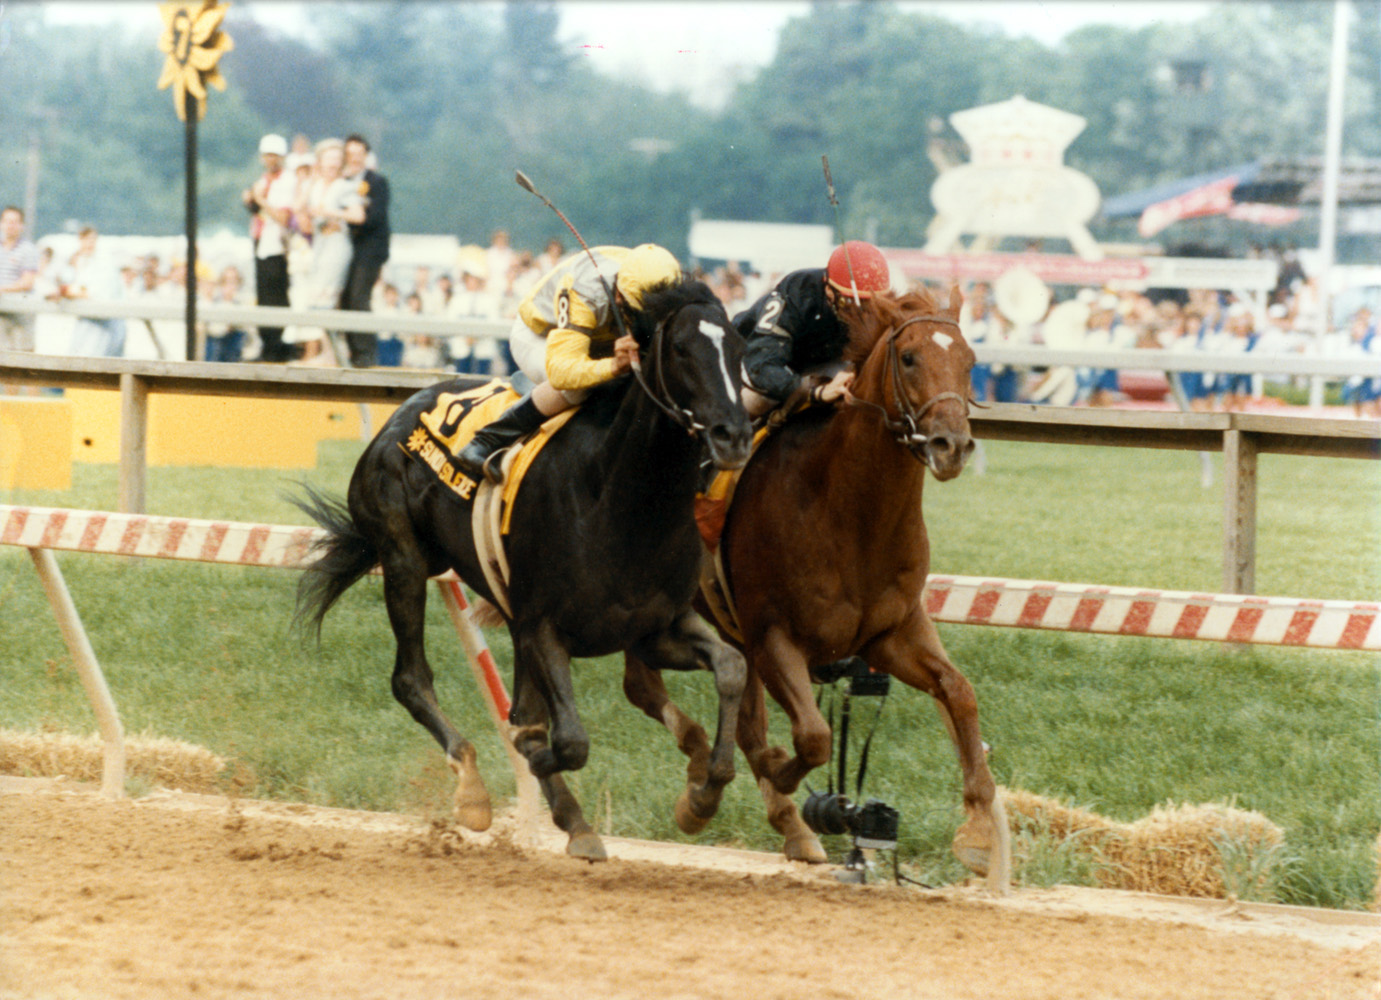 Sunday Silence (Patrick Valenzuela up) dueling fellow Hall of Famer Easy Goer (Pat Day up) down the stretch in the 1989 Preakness (Skip Dickstein/Museum Collection)